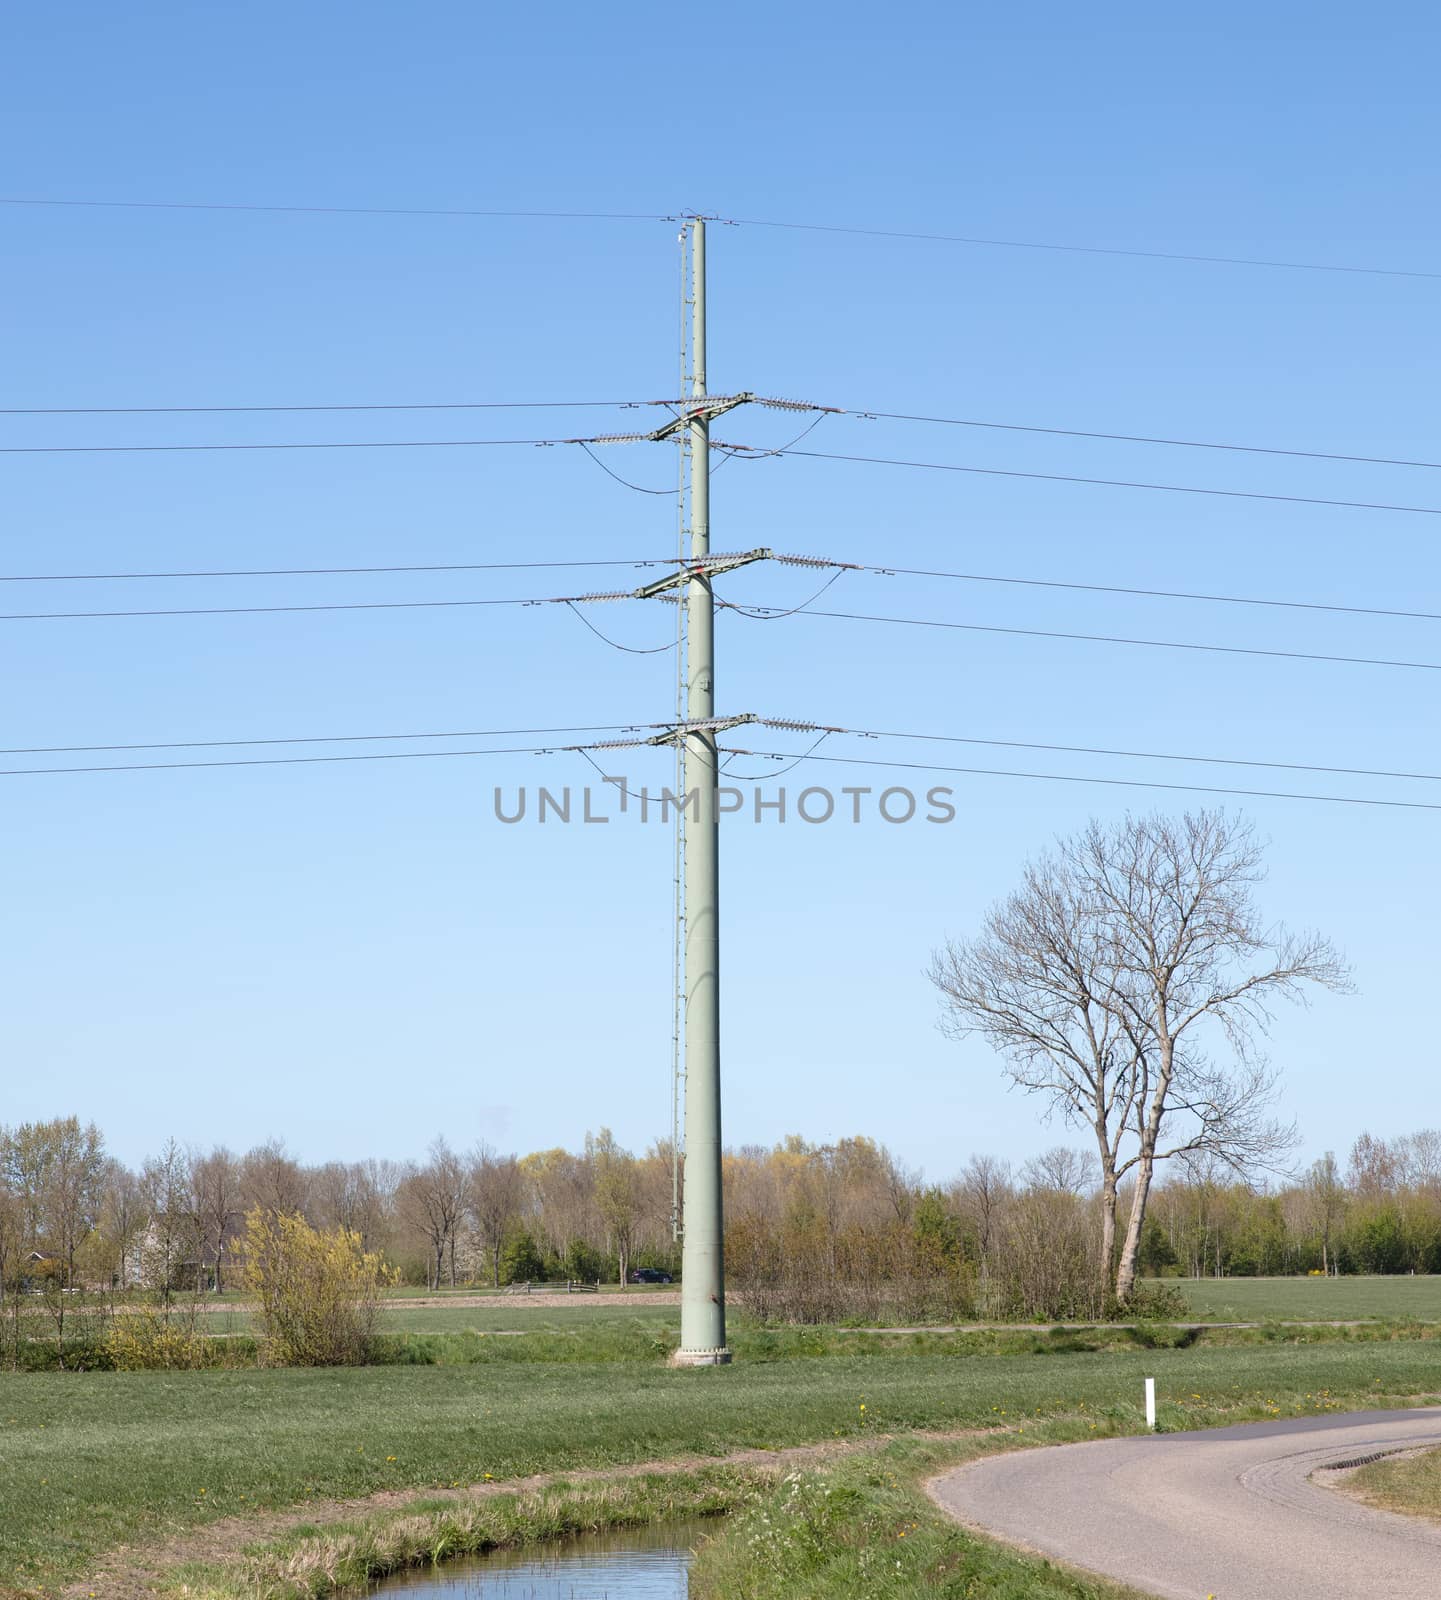 Electricity pole in nature, Friesland, the Netherlands